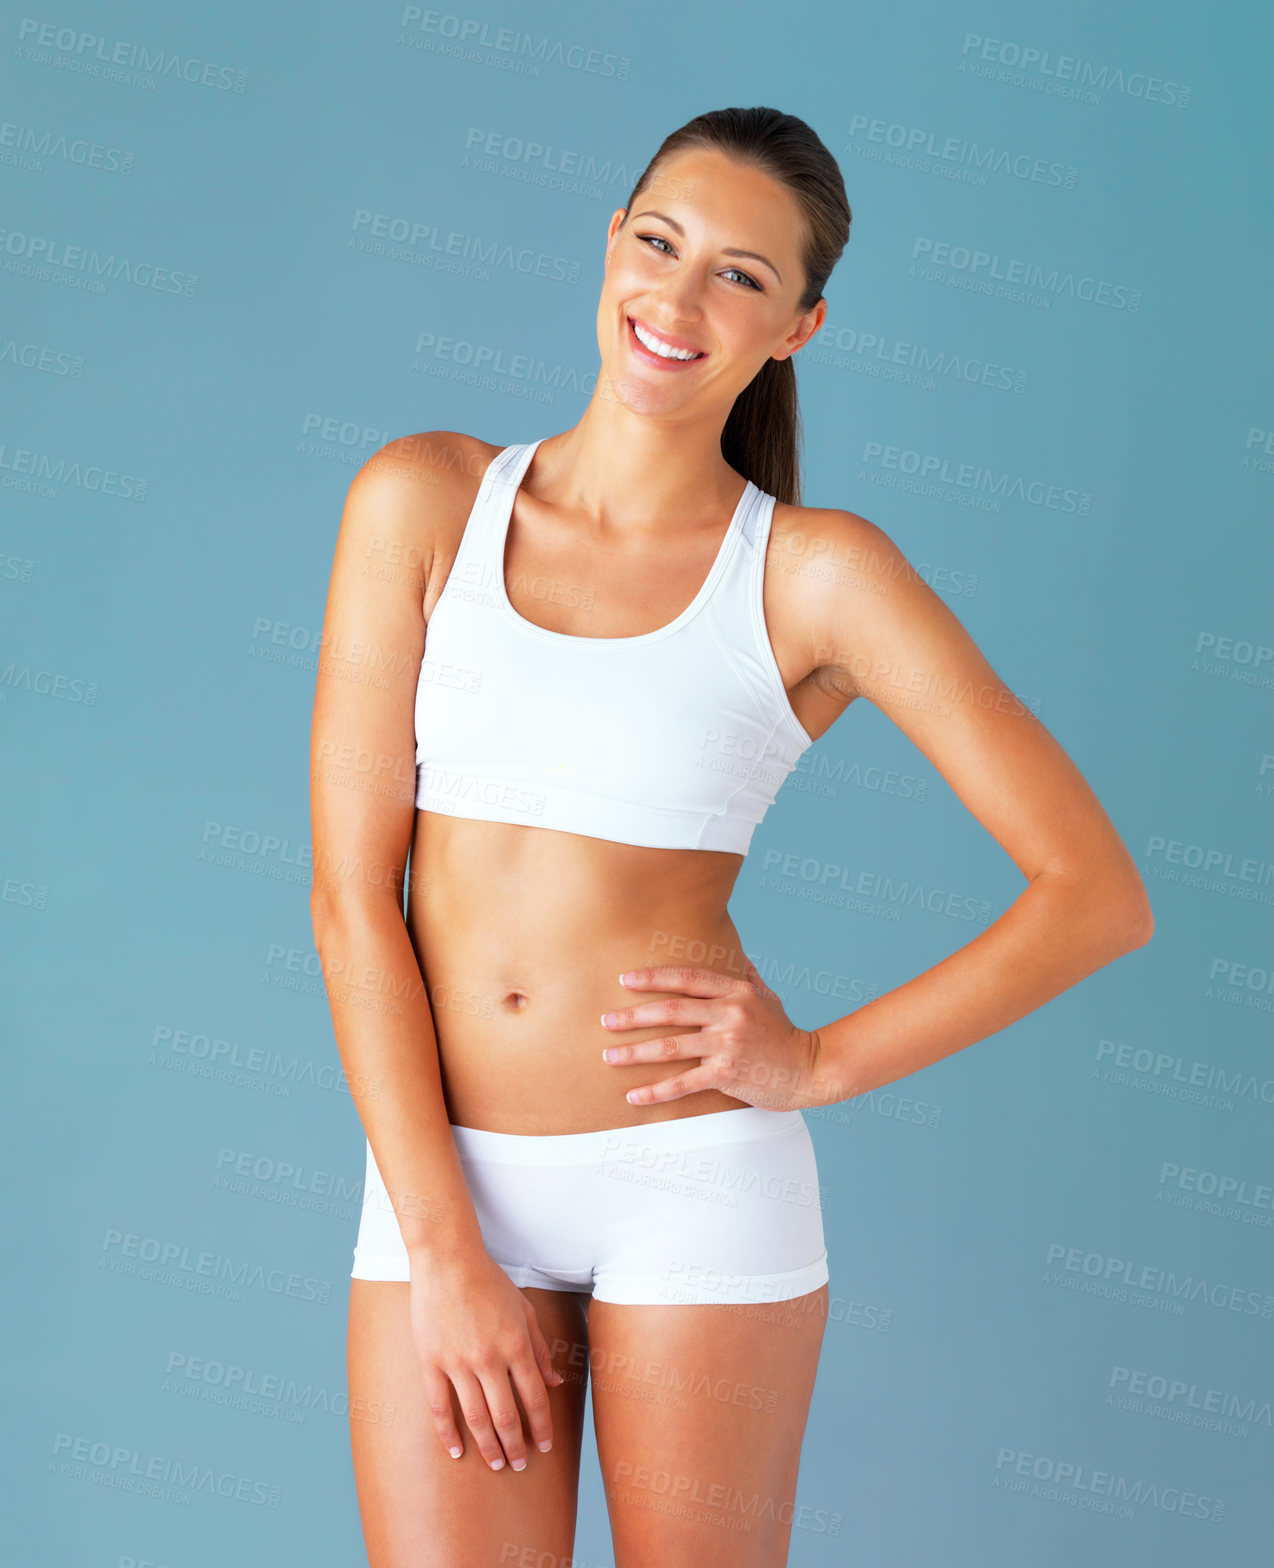 Buy stock photo Studio portrait of a fit young woman posing against a blue background